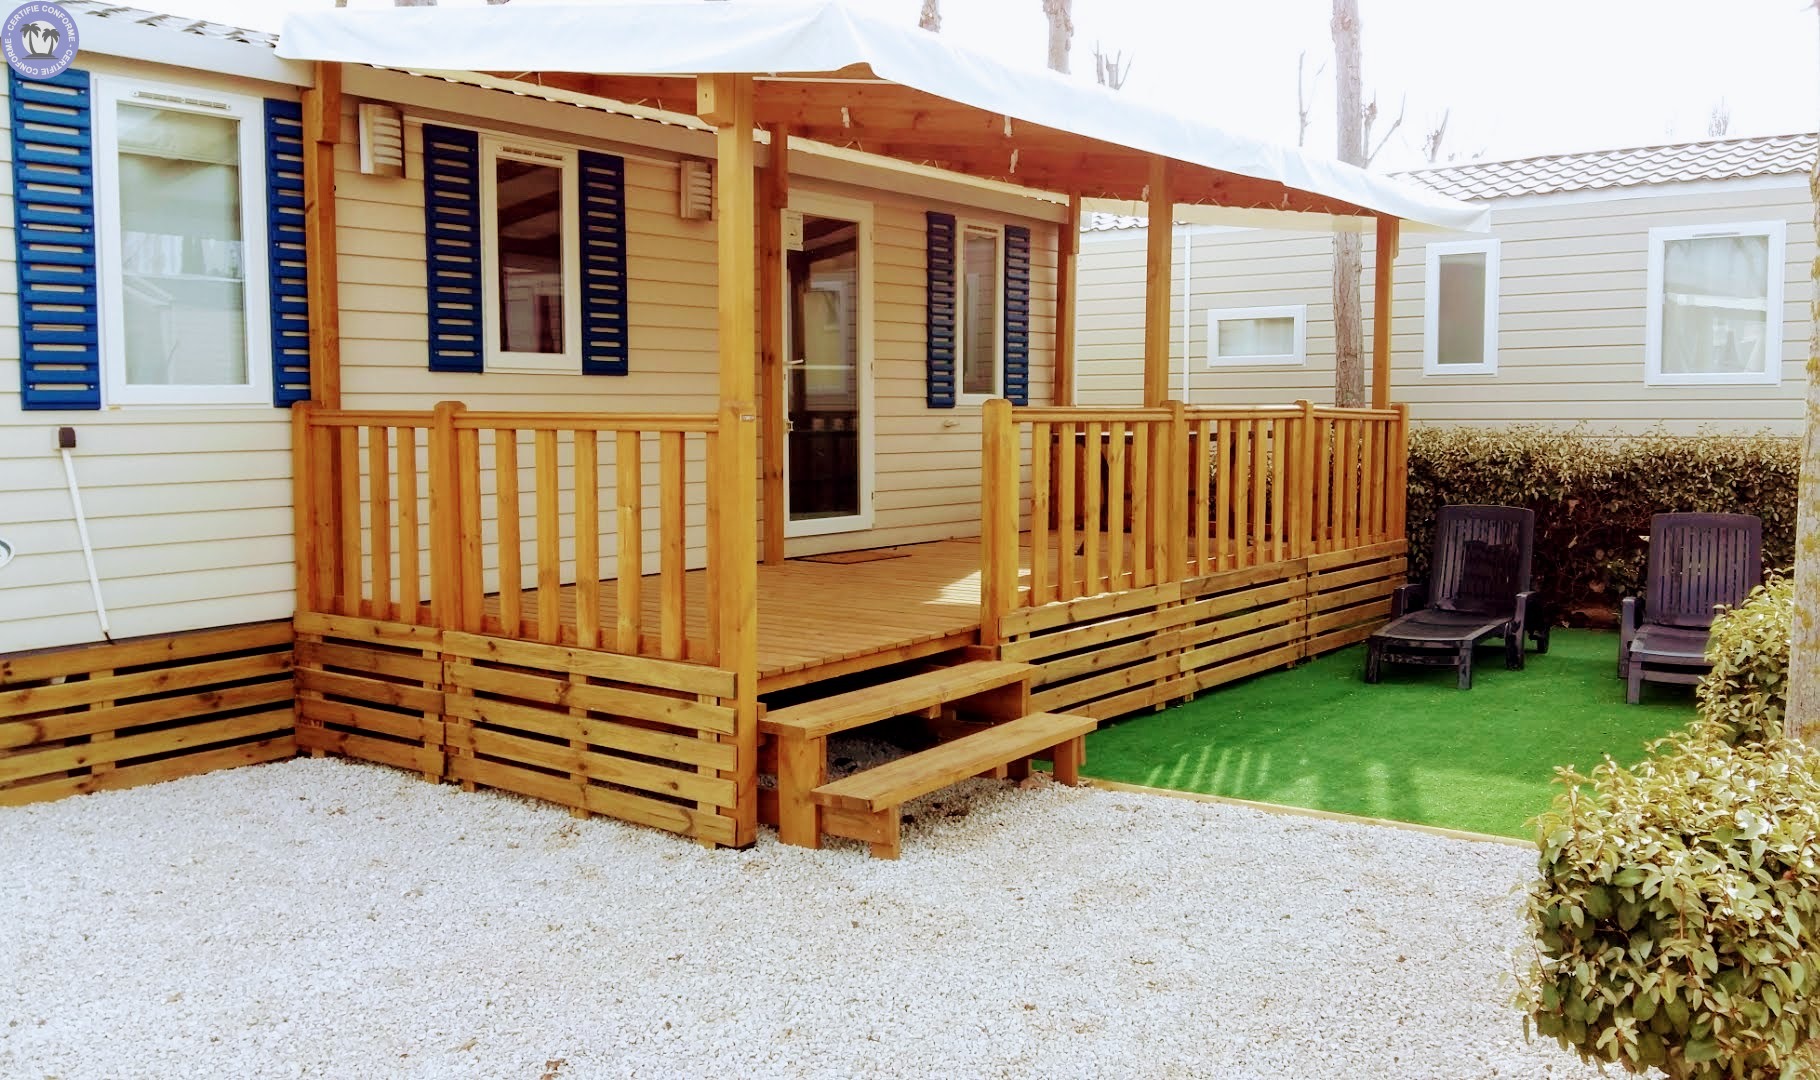 Camping-Provence-Alpes-Cote-d-Azur-Bouches-du-Rhone-MOBIL-HOME-3-ch-6-8-pers-a-Valras-plage-Herault0182544586265667278.jpg